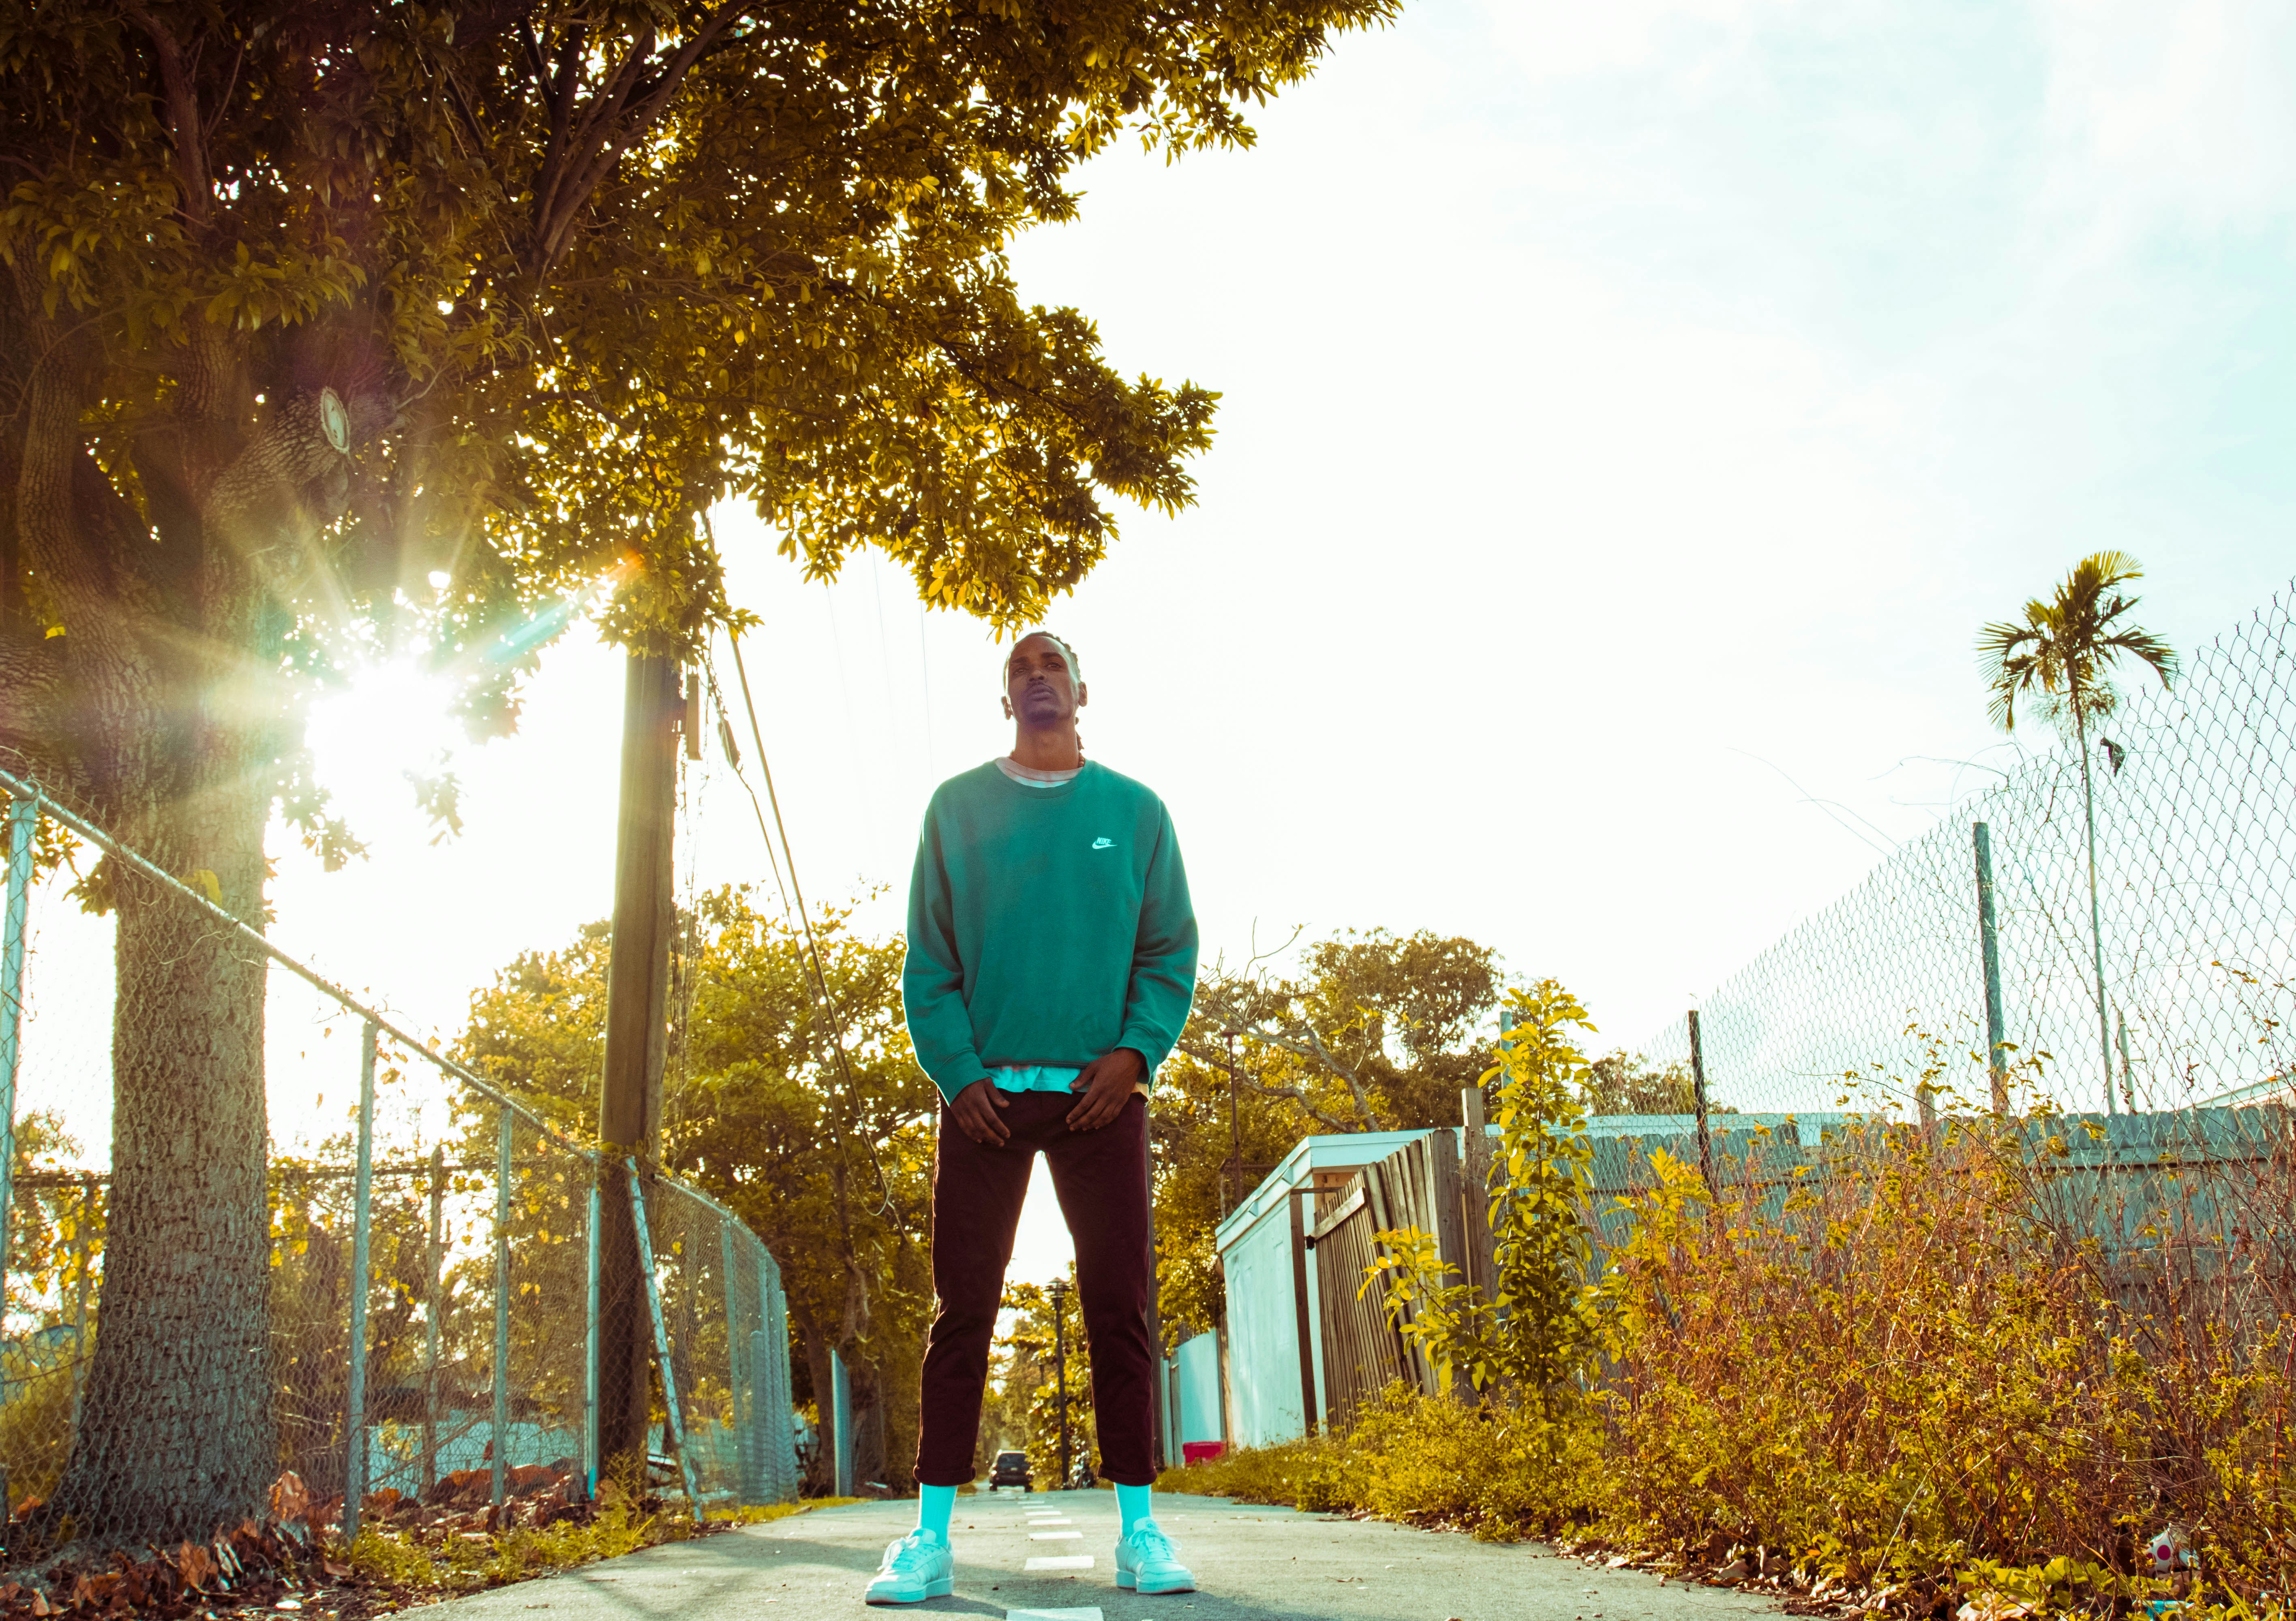 man in green sweater standing on pathway during daytime